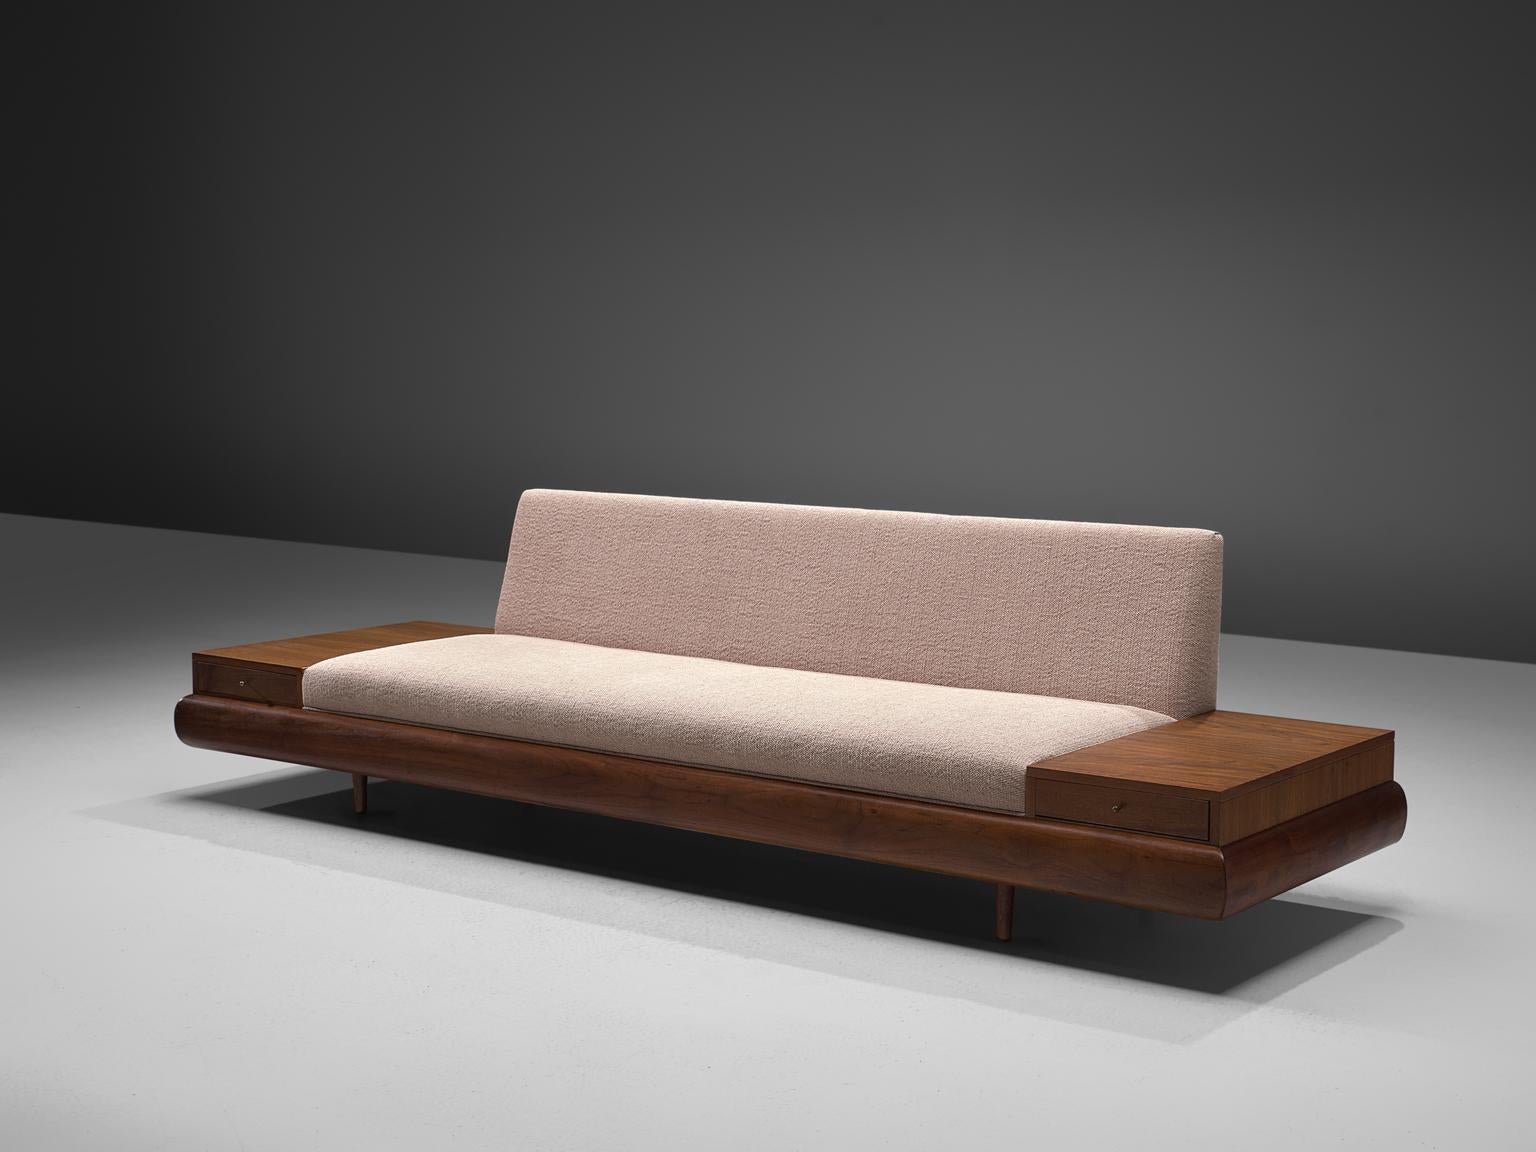 Adrian Pearsall, 'Platform' sofa with two drawers, fabric upholstery, walnut, United States, 1960s

Adrian Pearsall is known for his rather unique sofa designs. The '1709-S' is no exception. On a low base of a thick walnut frame rests the sofa